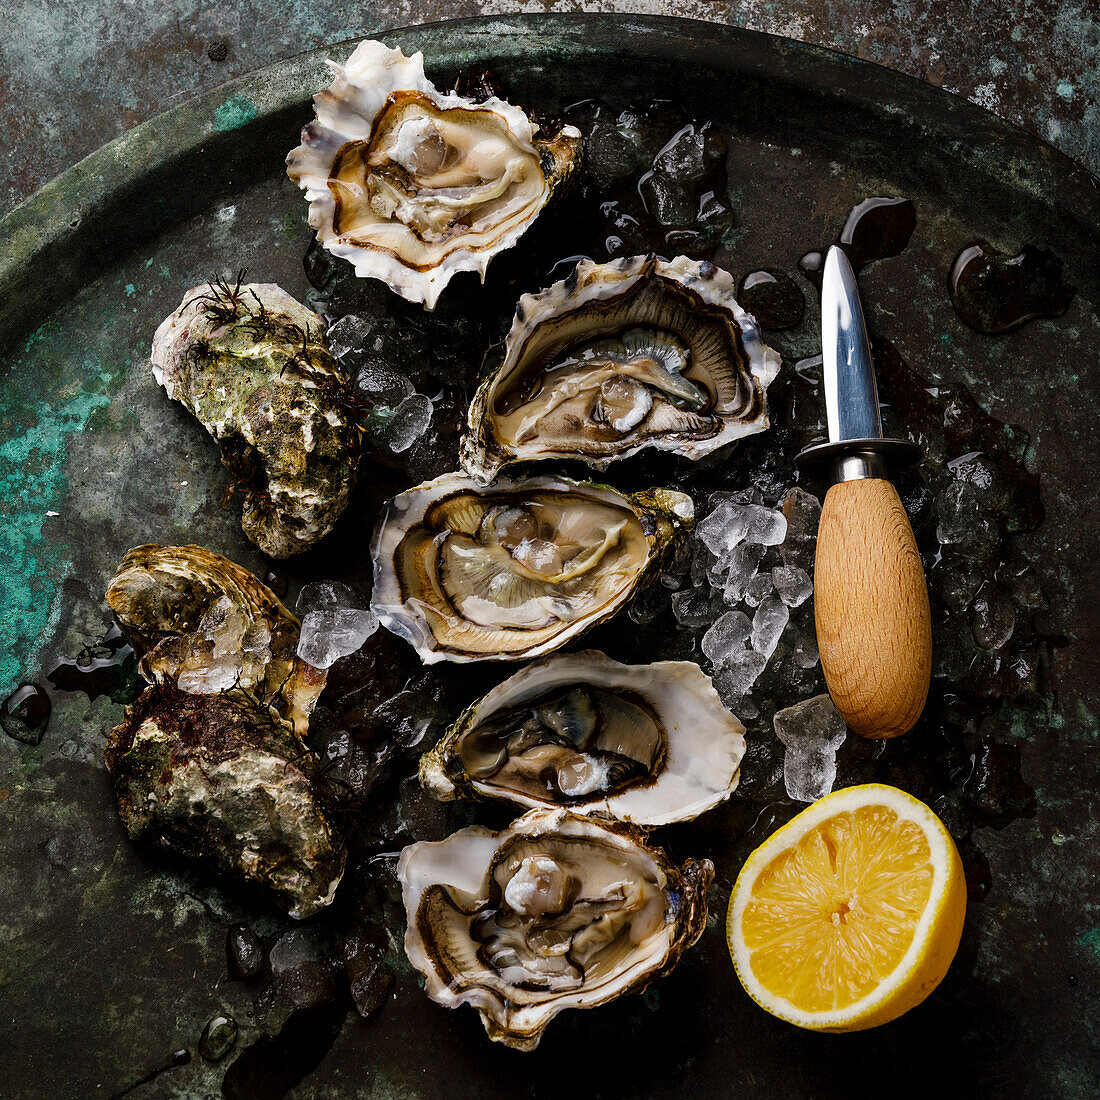 Open, freshly shucked oysters with lemon on ice against a dark background